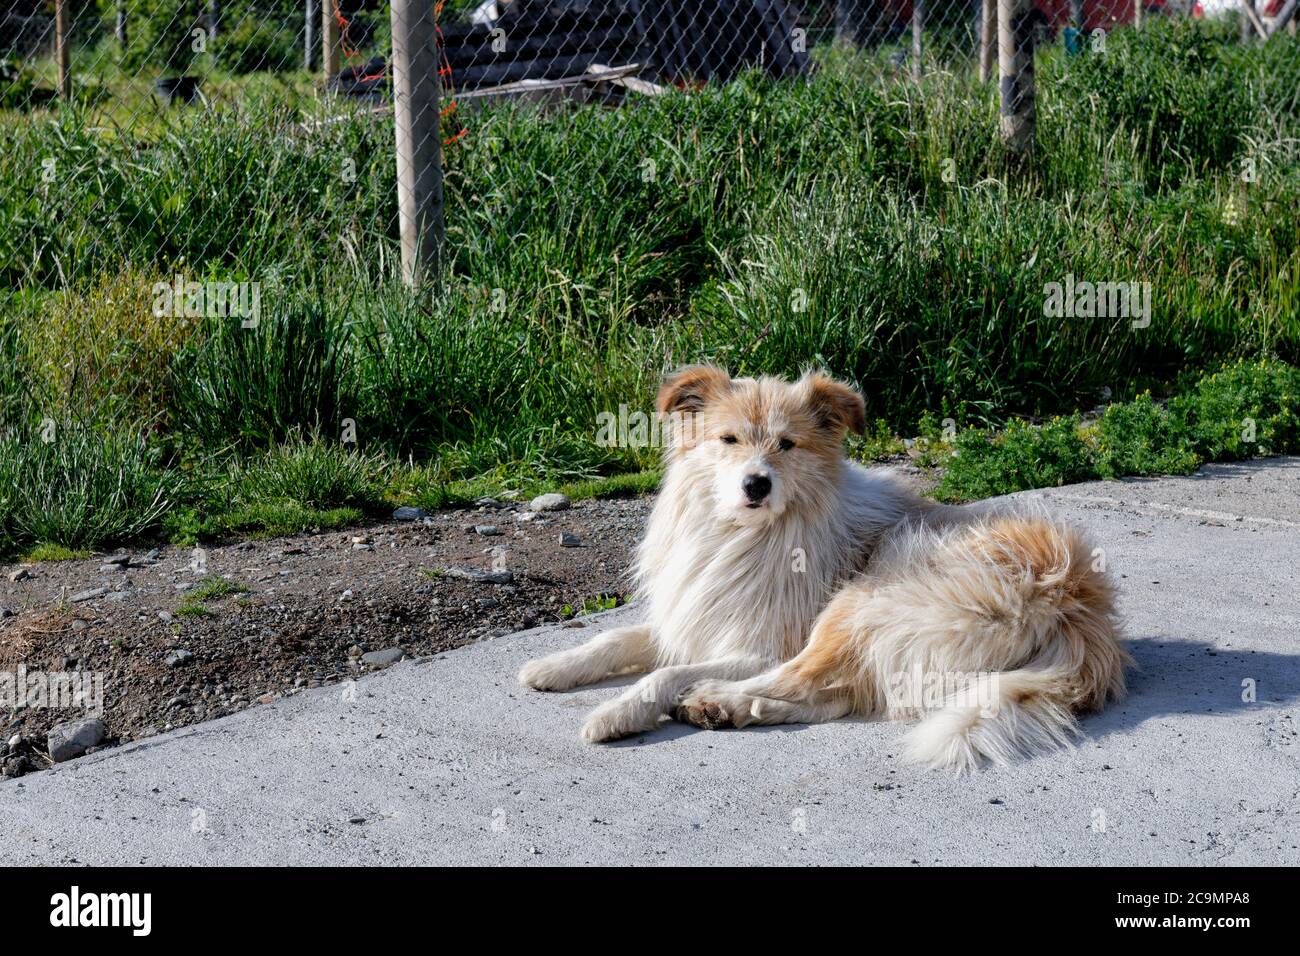 Dog resting on the ground, Puerto Río Tranquilo, Carretera Austral, Aysen Region, Patagonia, Chile Stock Photo